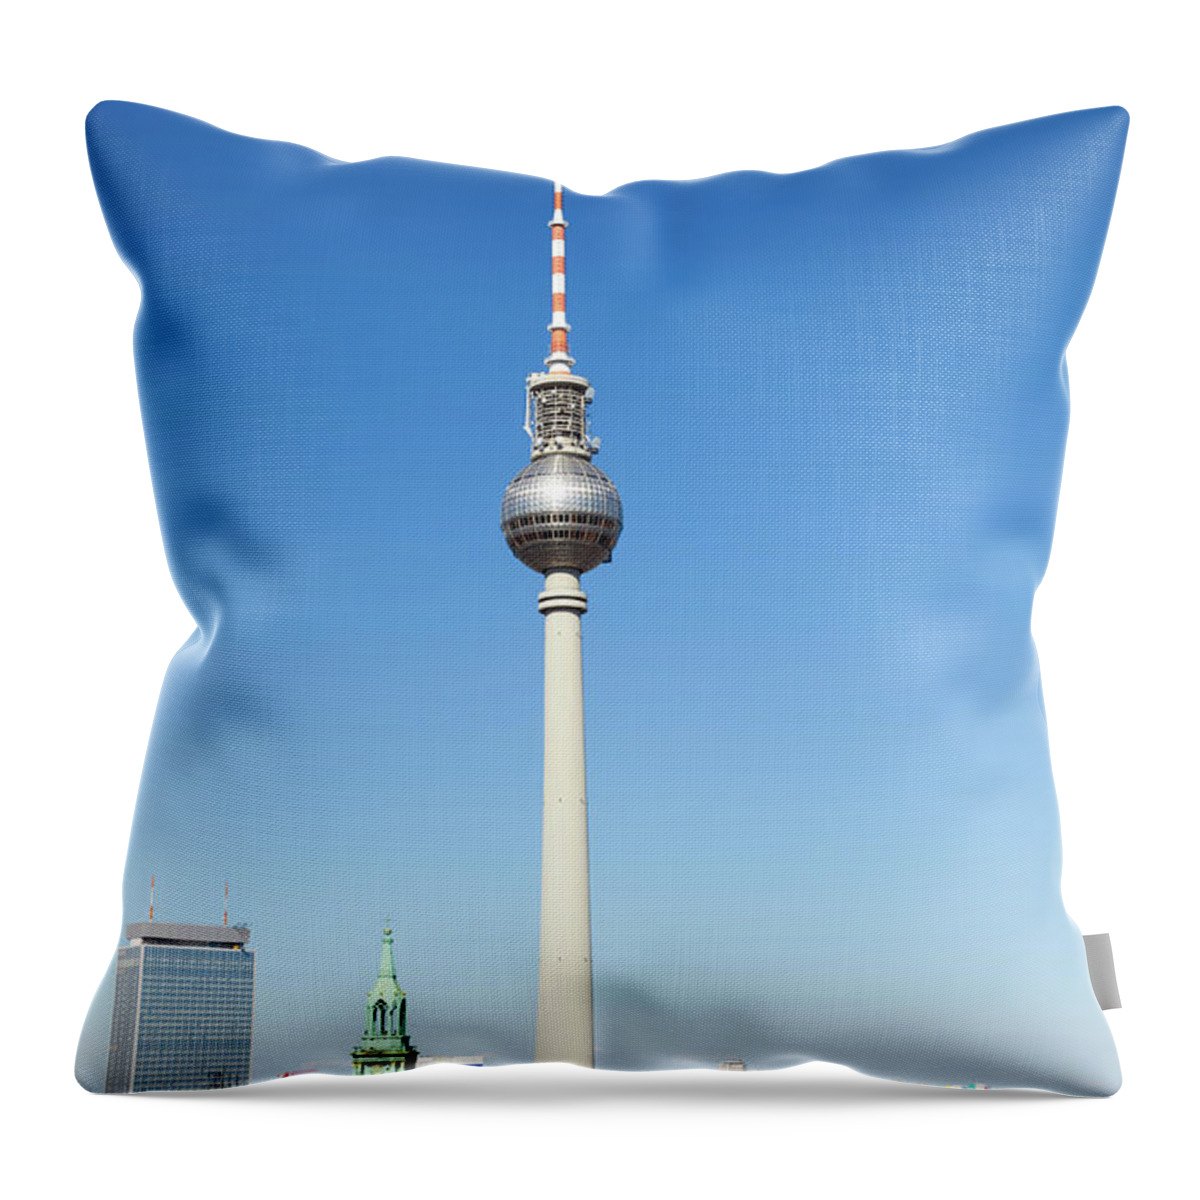 Alexanderplatz Throw Pillow featuring the photograph Tv Tower In Berlin, Germany by Tomml